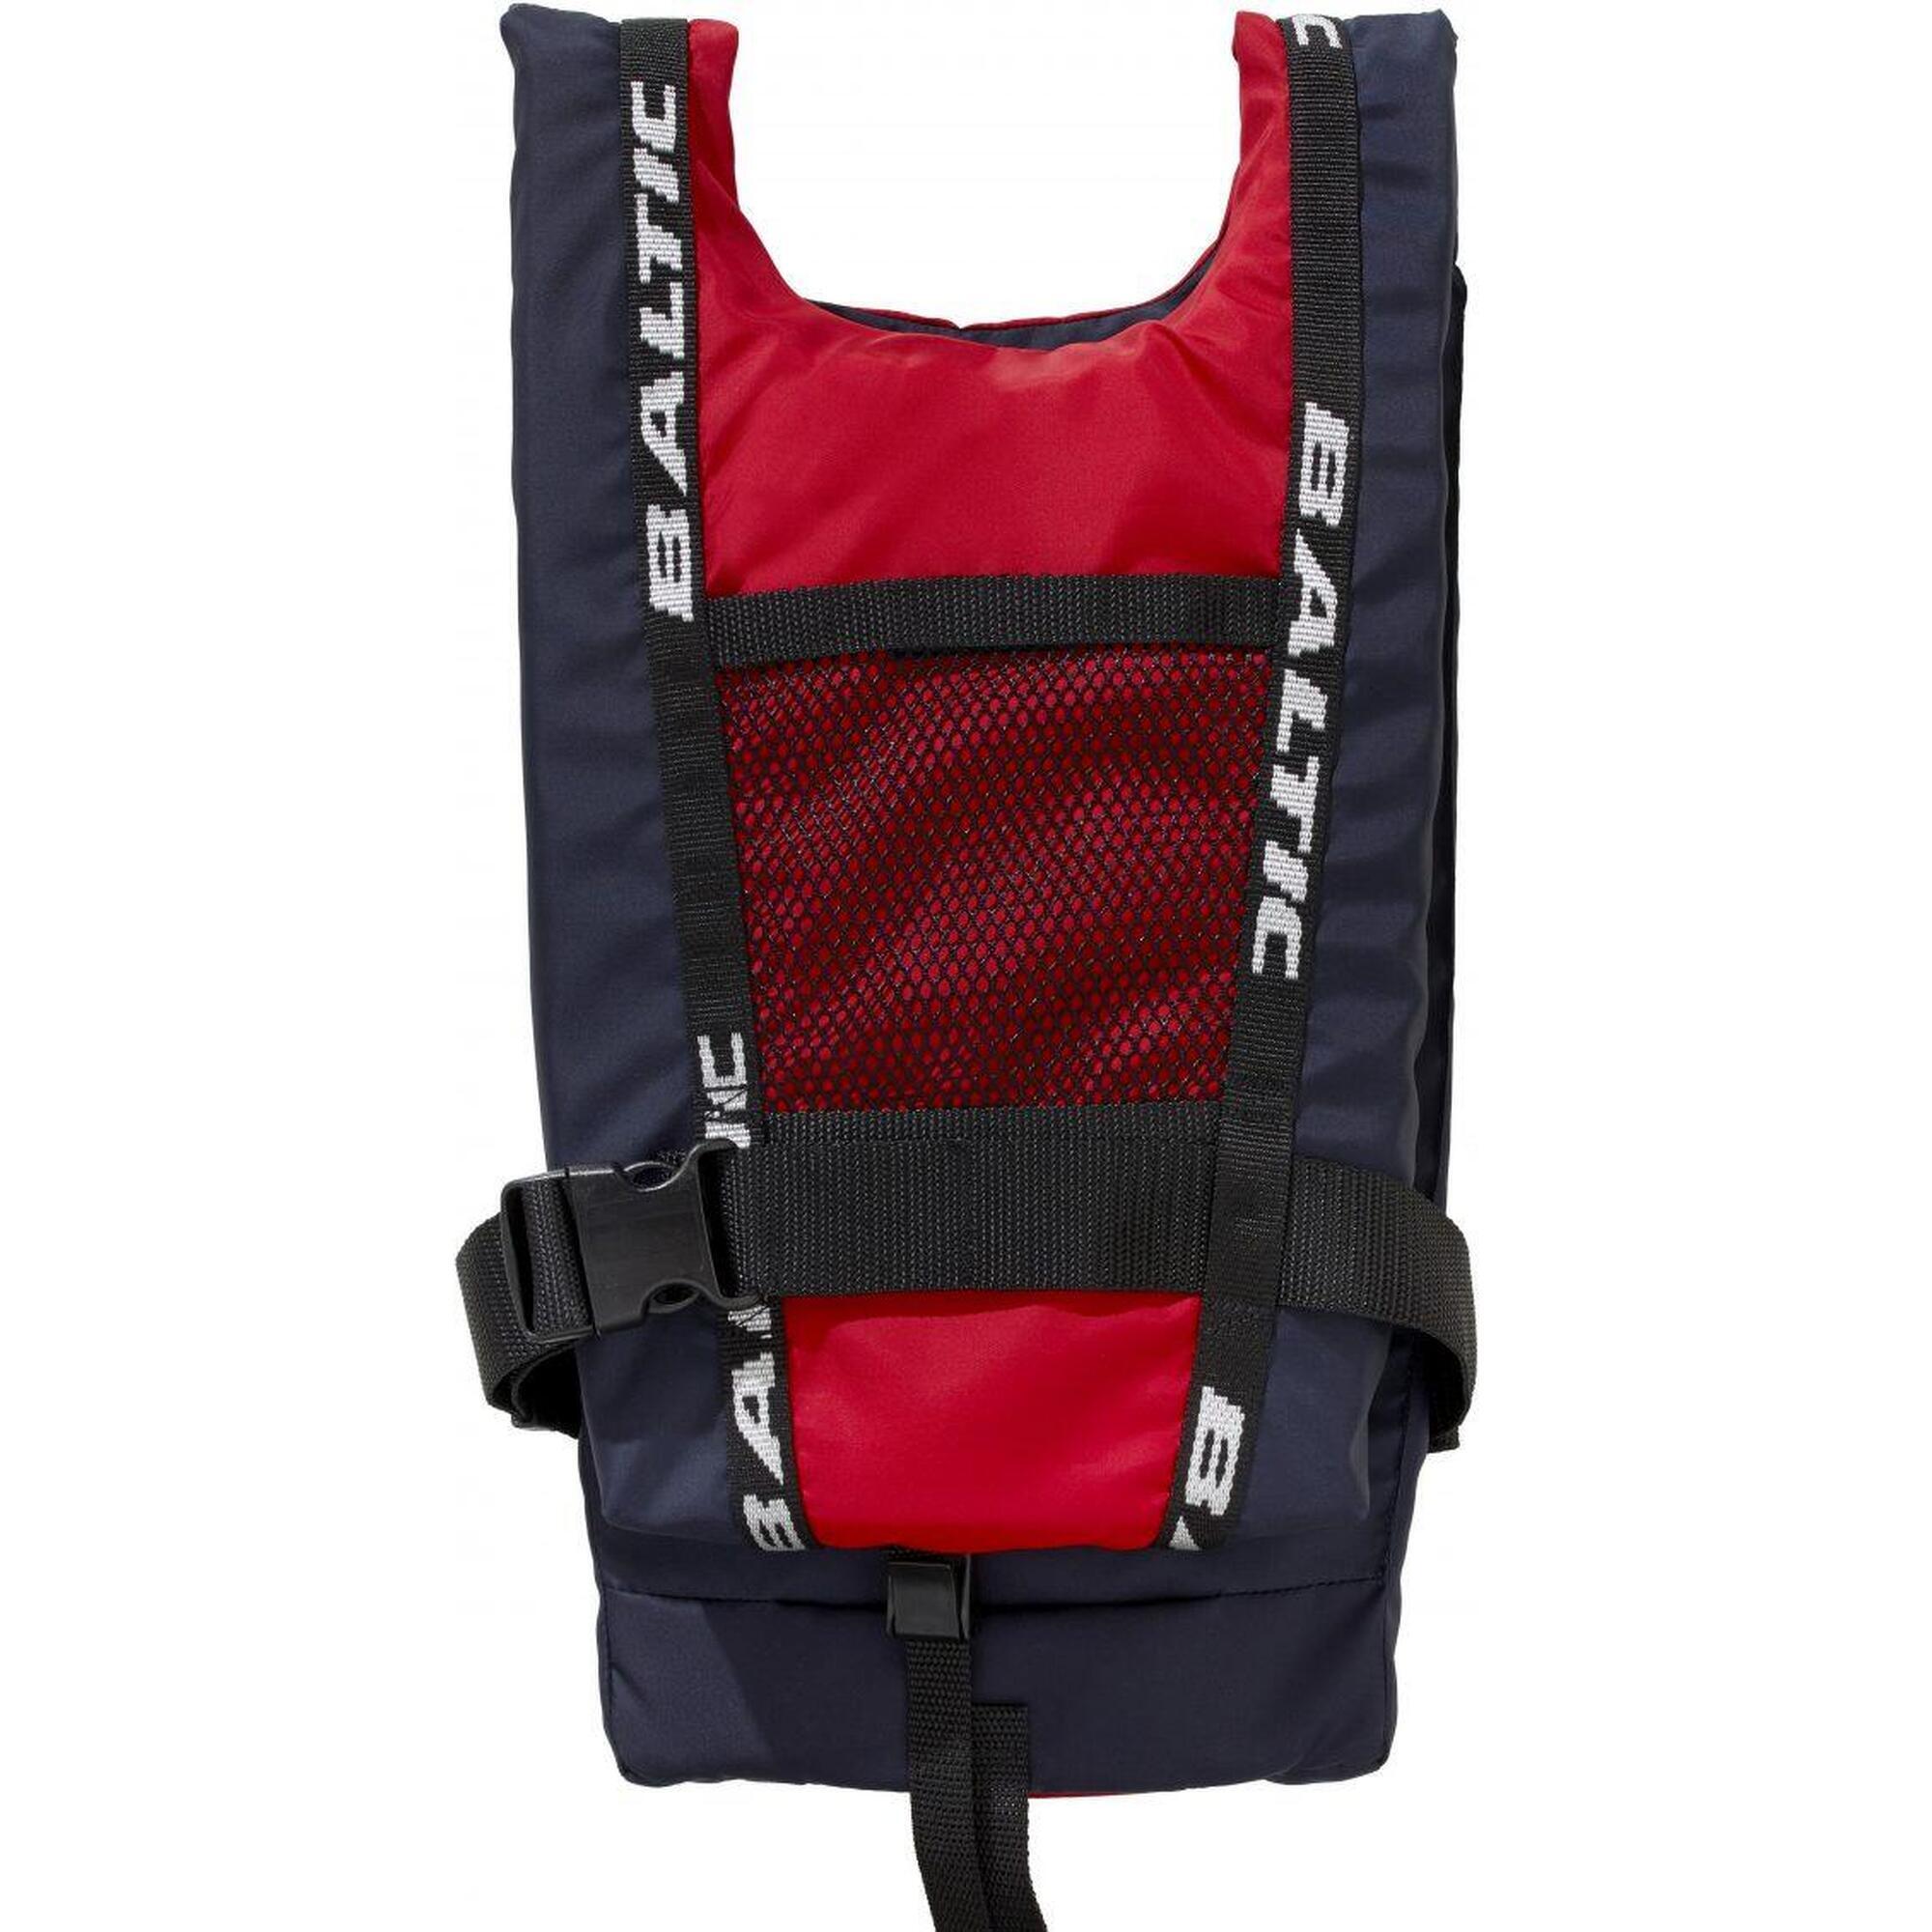 Baltic Canoe Buoyancy Aid One Size Fits All Red/Navy 1/1